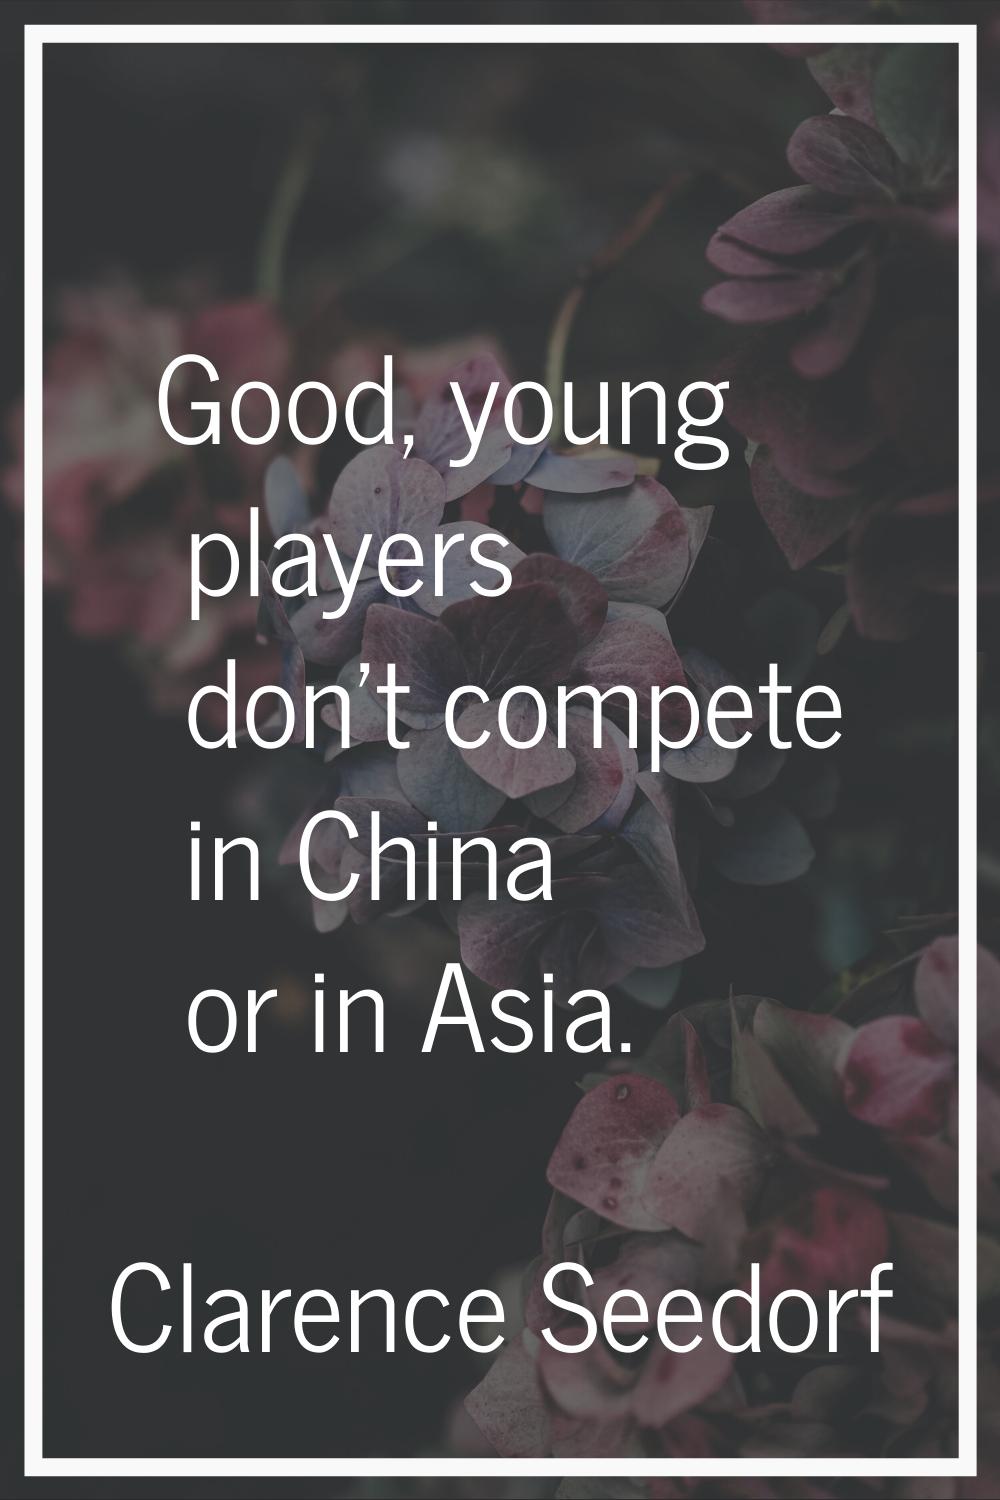 Good, young players don't compete in China or in Asia.